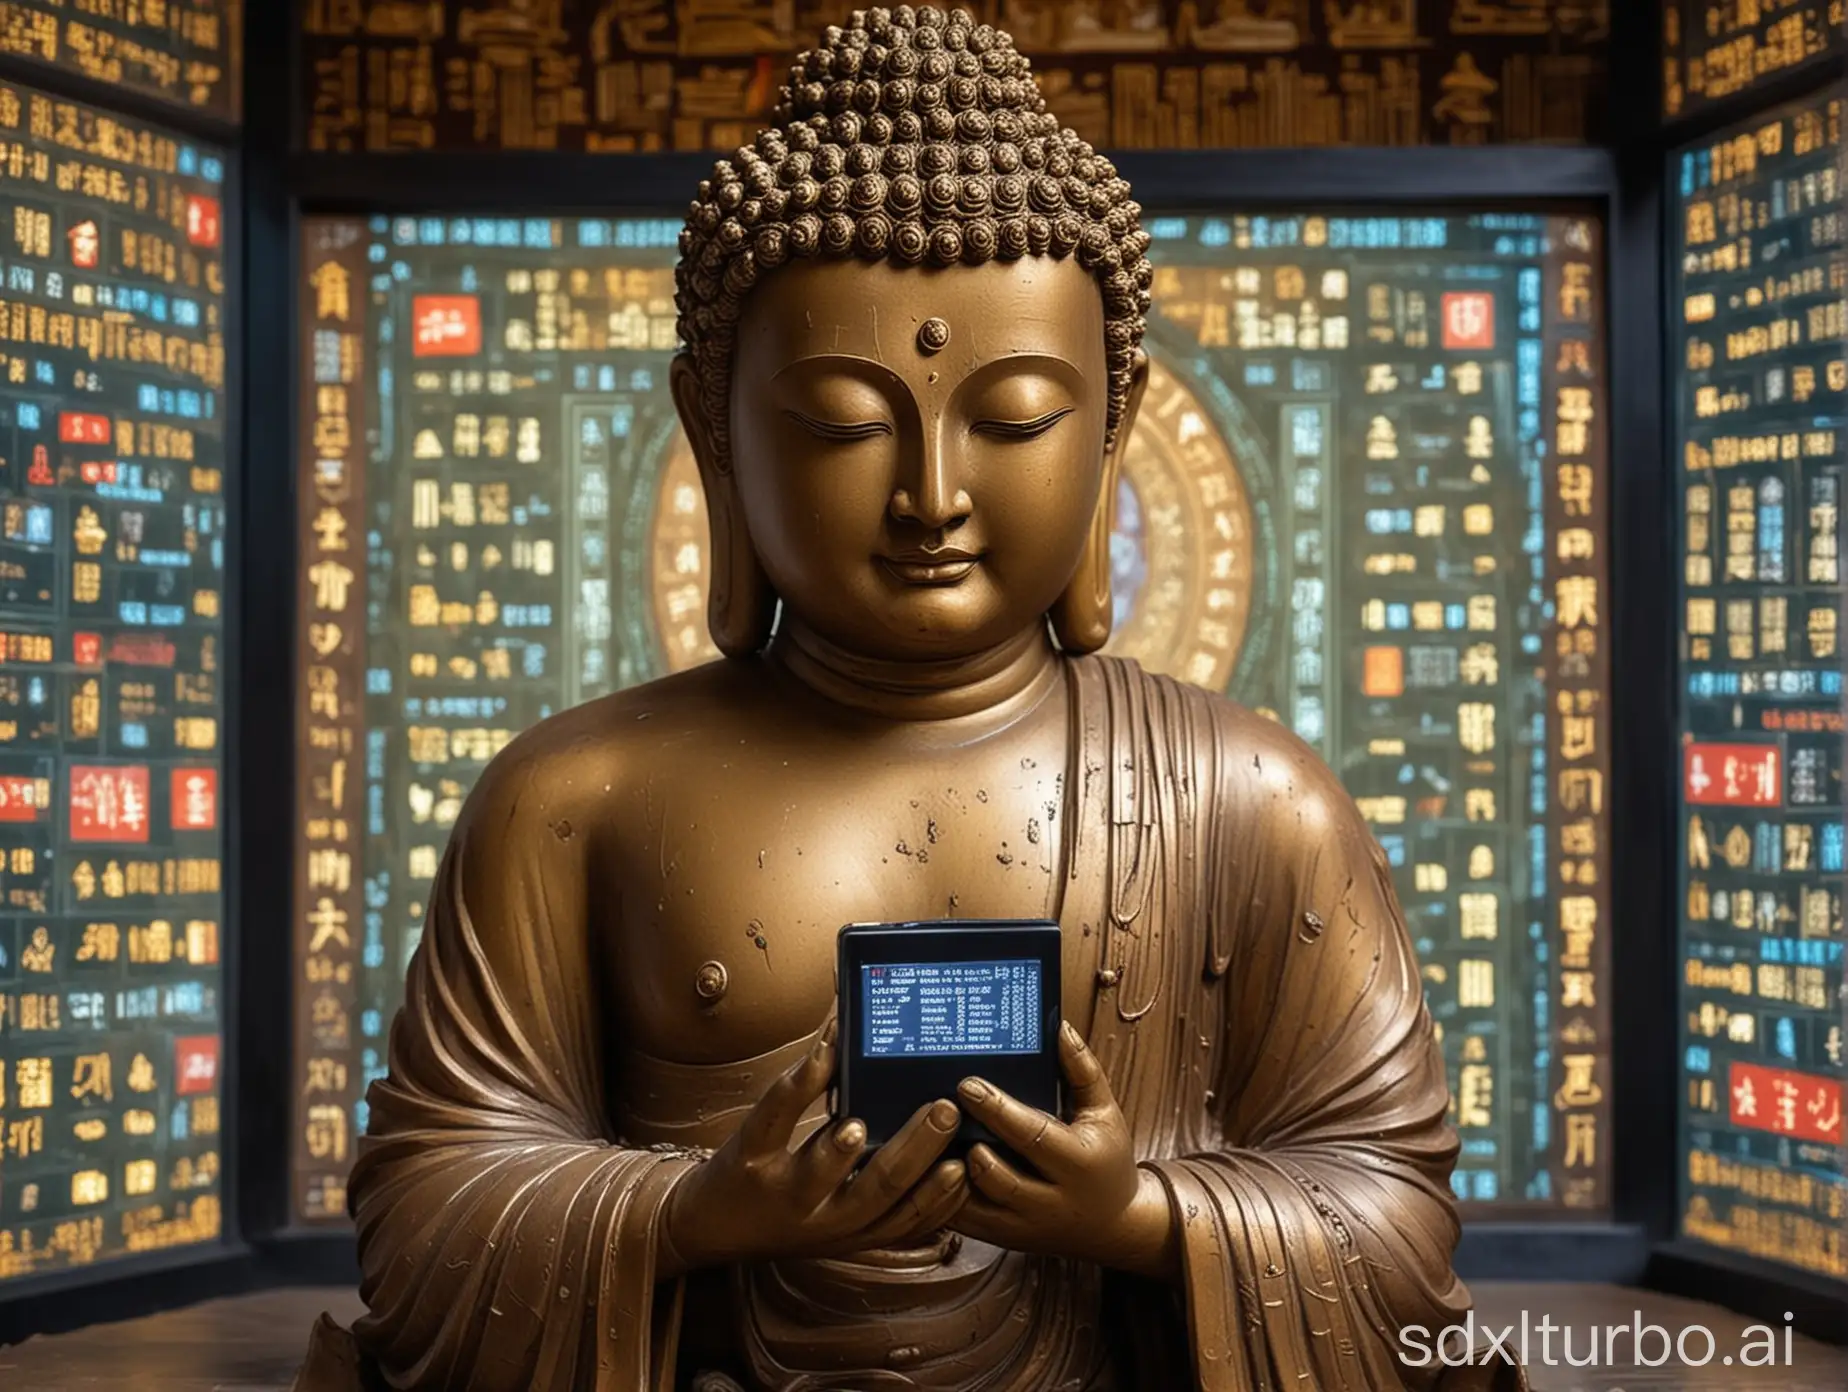 Buddha statue has an electronic screen in its hand, surrounded by electronic information